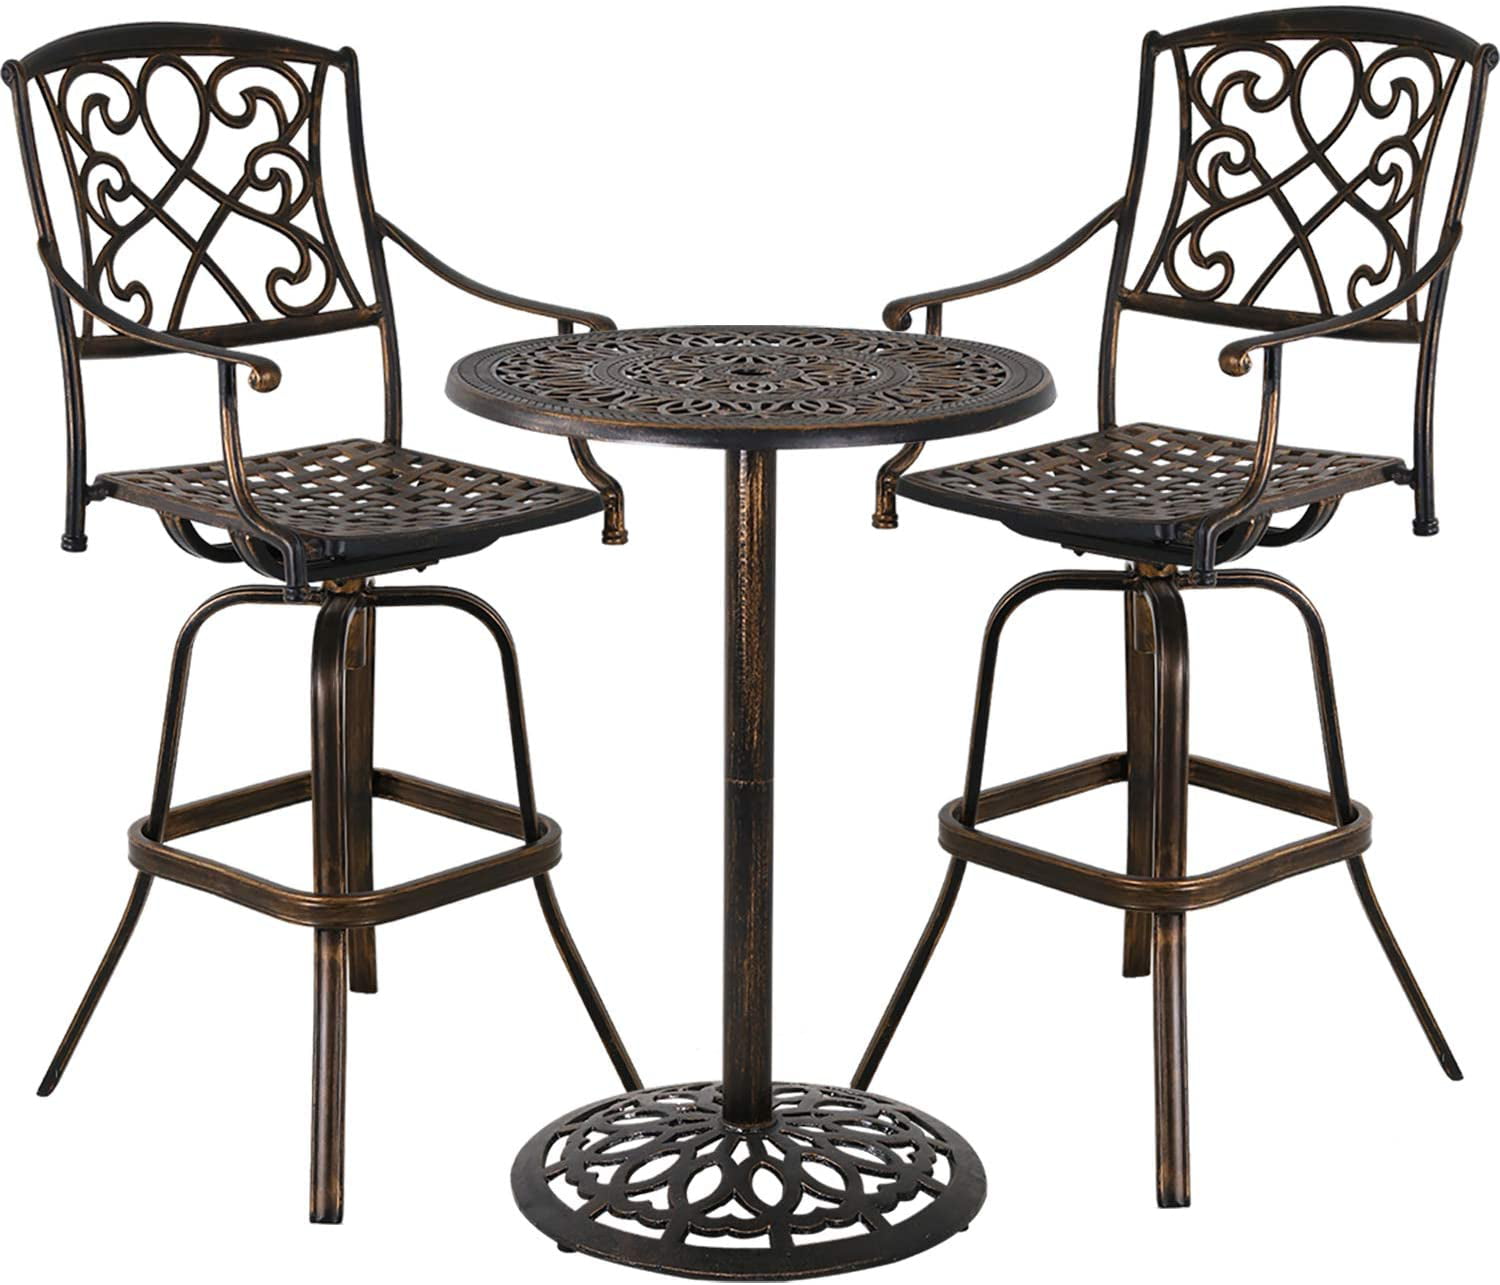 Chair Bistro Table, Bar Height Outdoor Bistro Table And Chairs